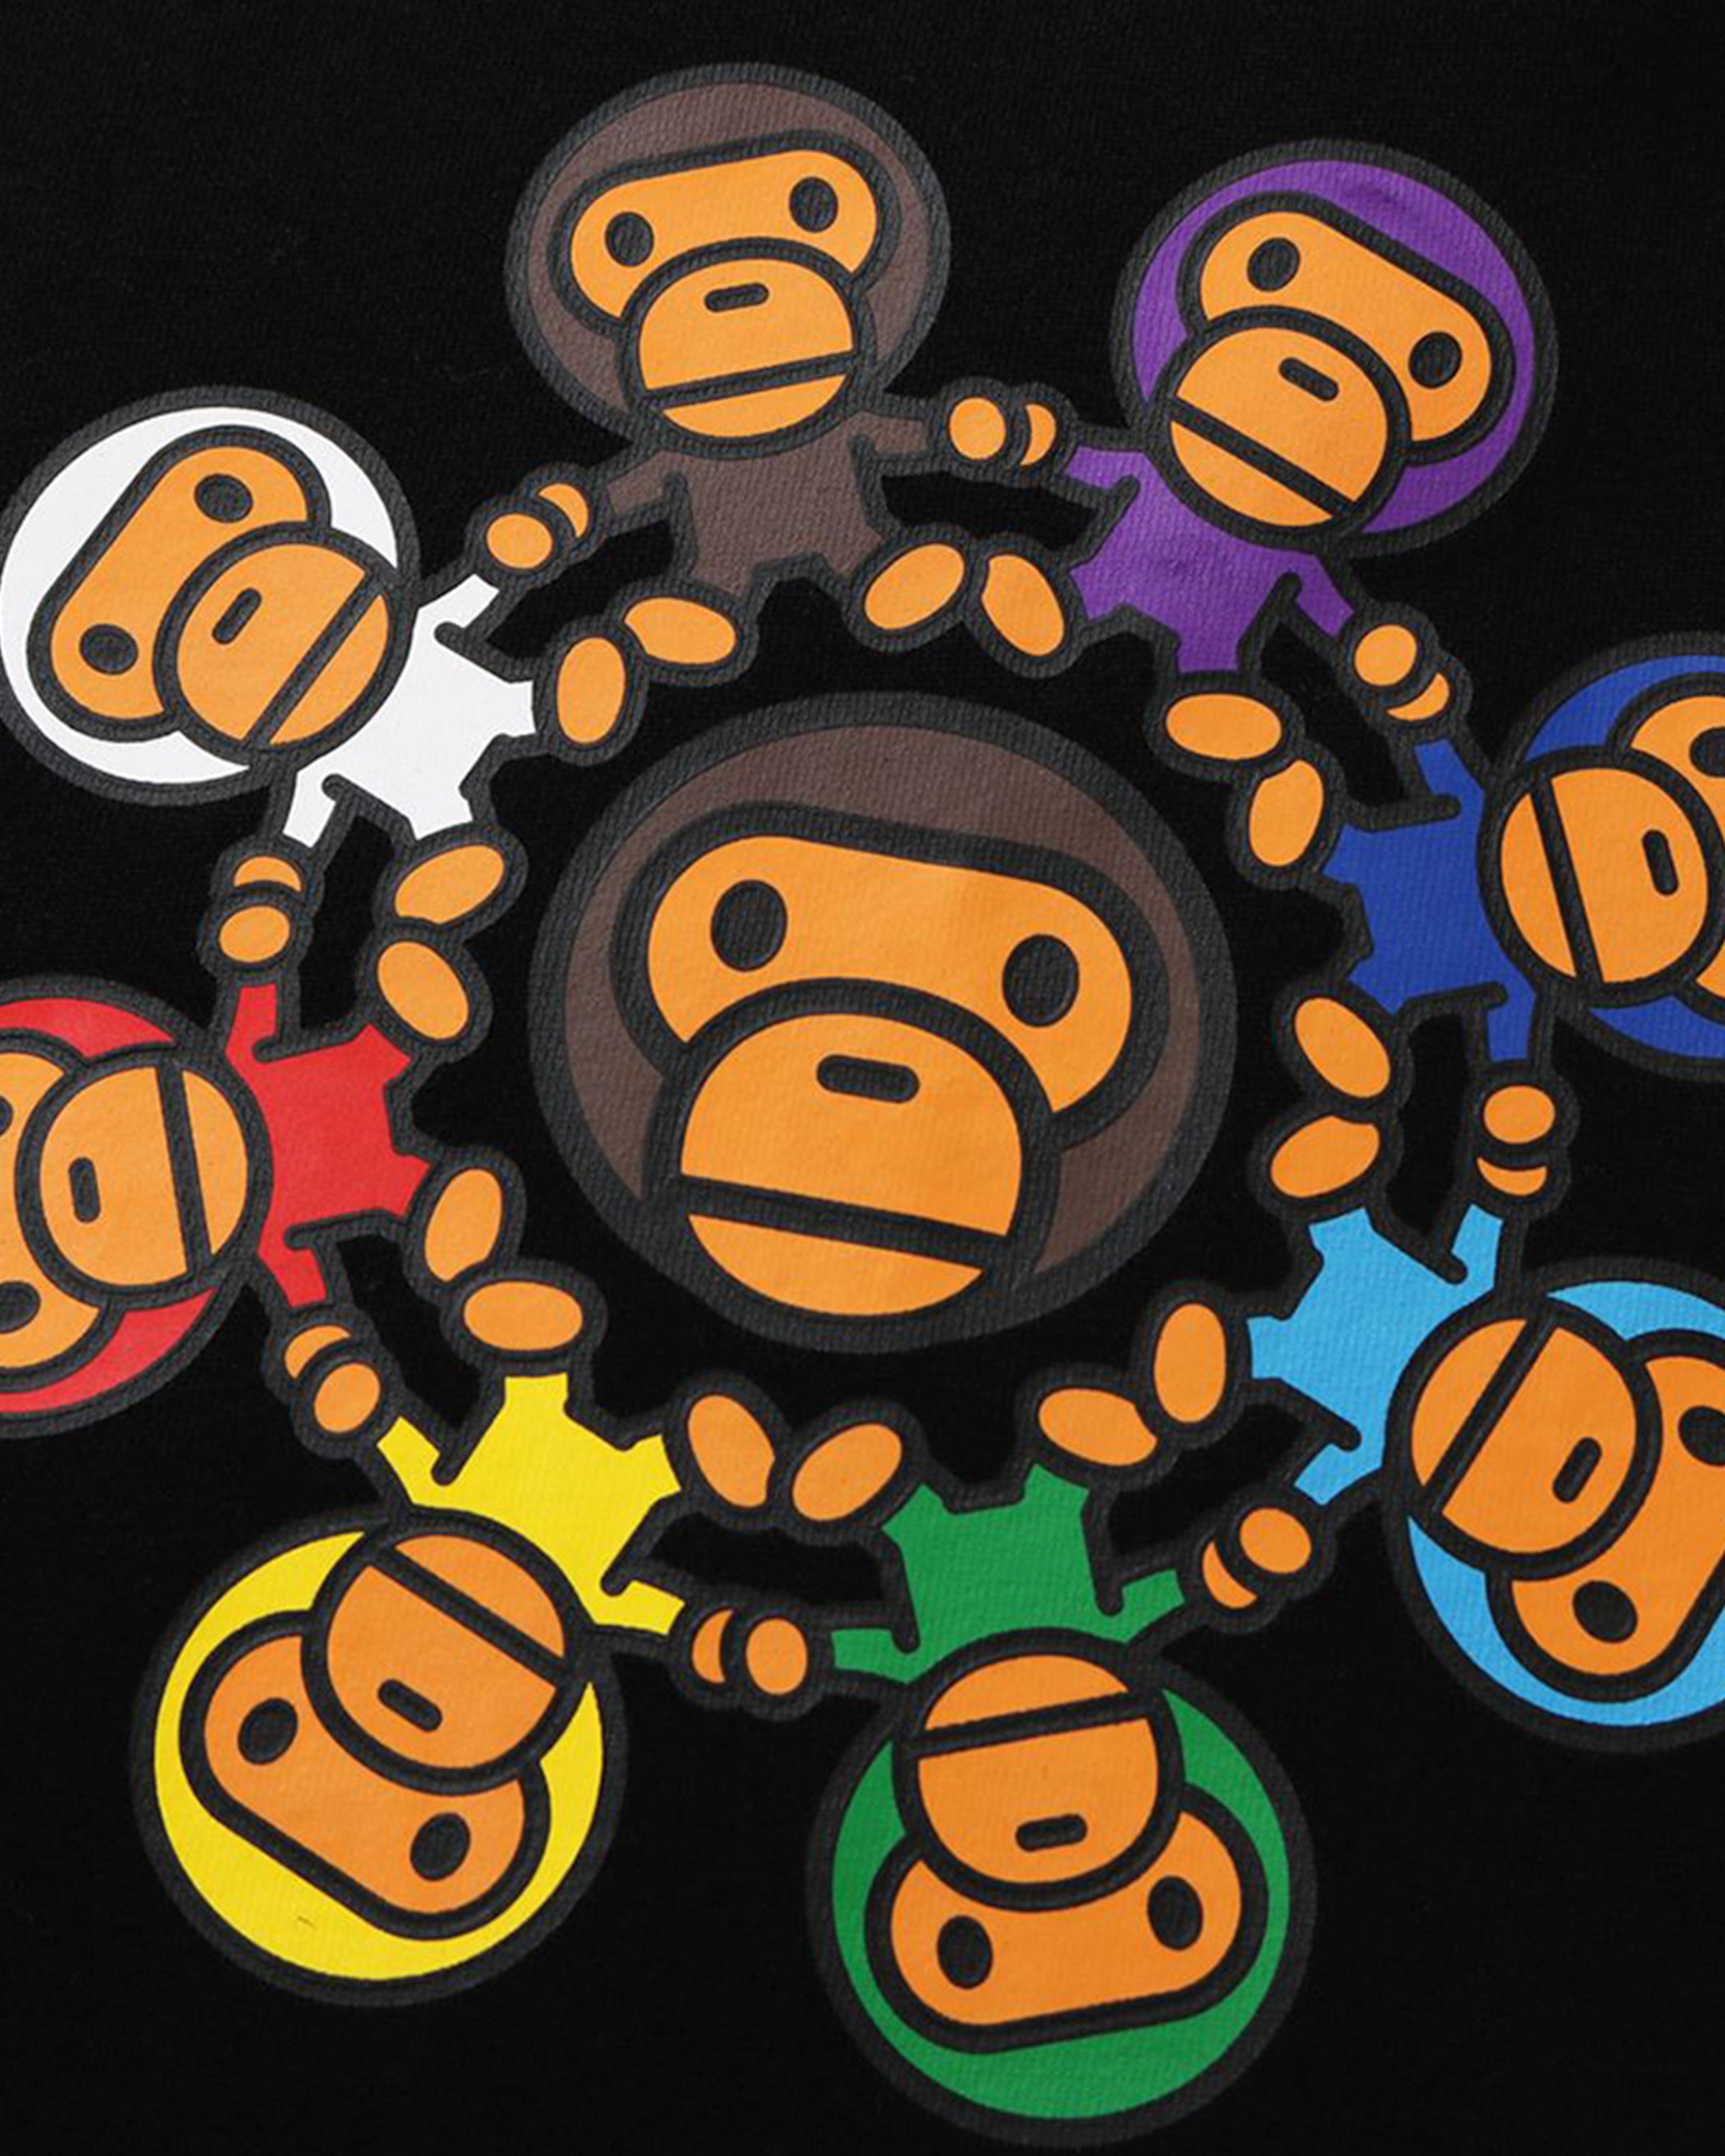 BAPE MILO CIRCLE RELAXED PULLOVER HOODIE - BLACK